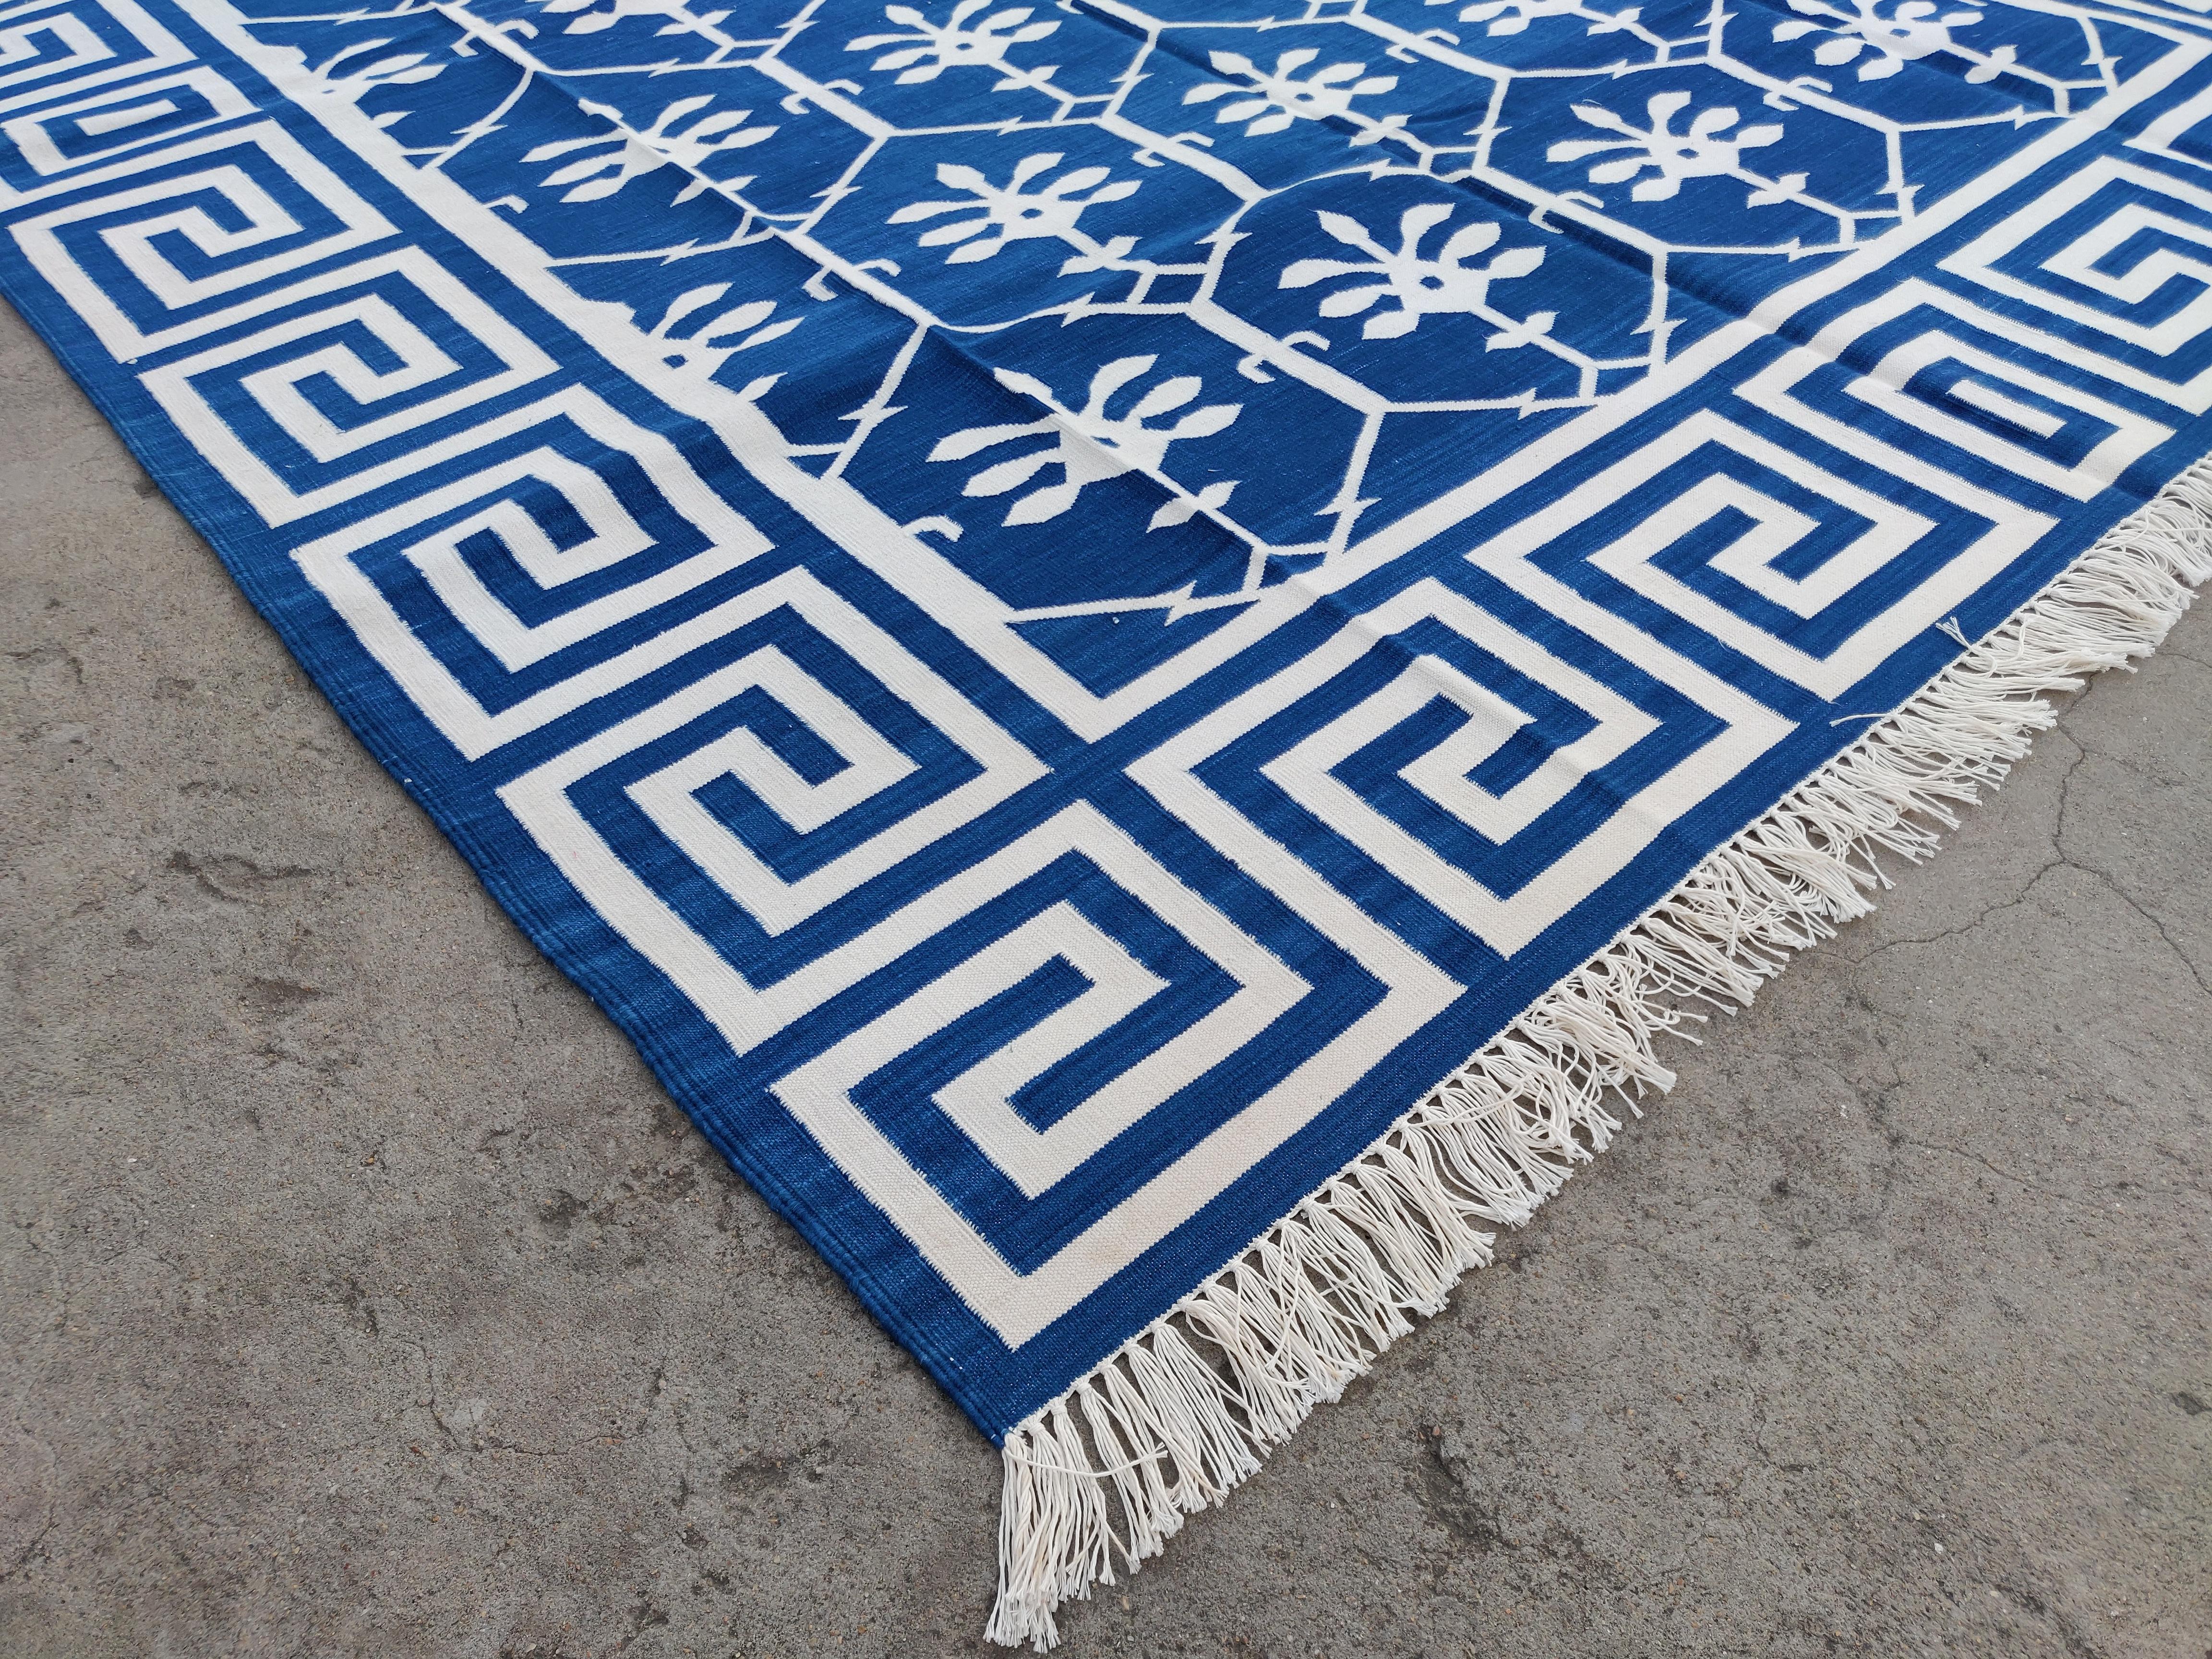 Hand-Woven Handmade Cotton Area Flat Weave Rug, Blue And White Flower Indian Dhurrie-6x9 For Sale